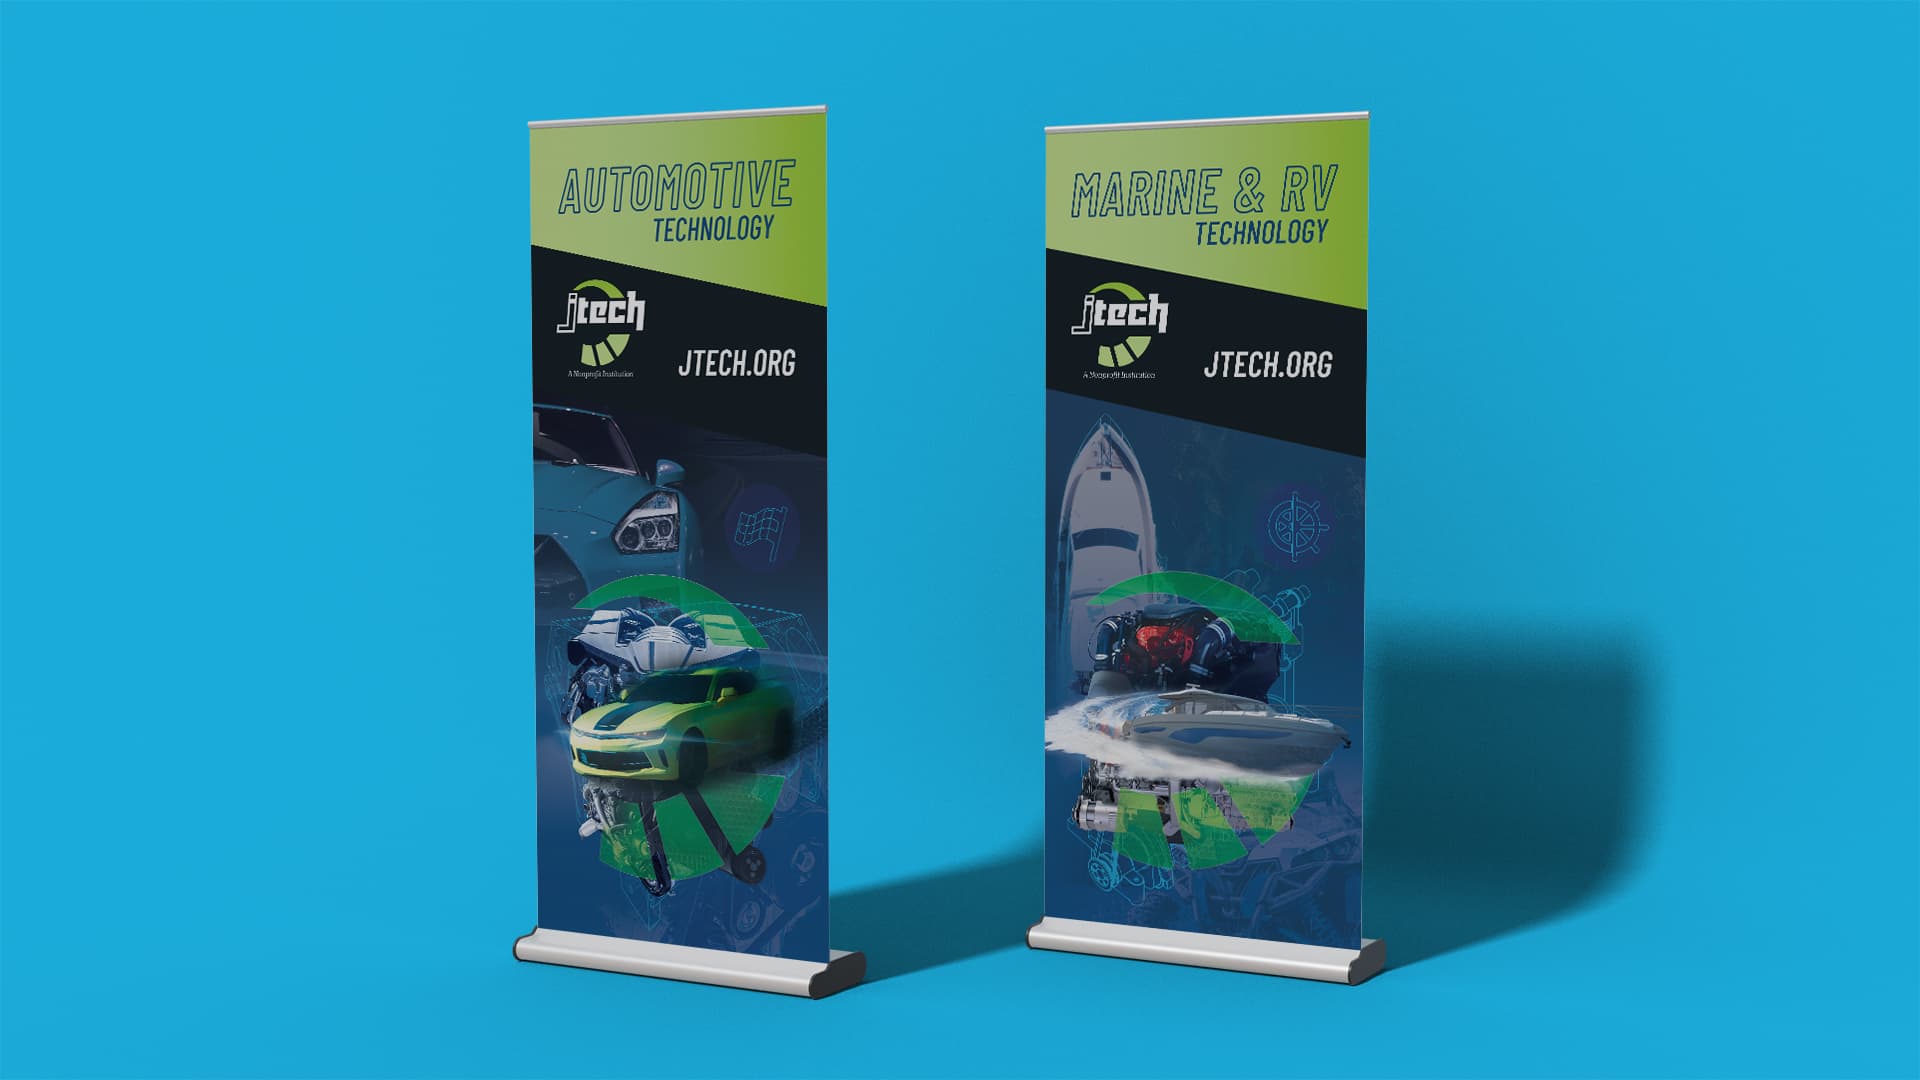 J-Tech pop-up banners featuring the Automotive Technology and Marine & RV Technology programs.